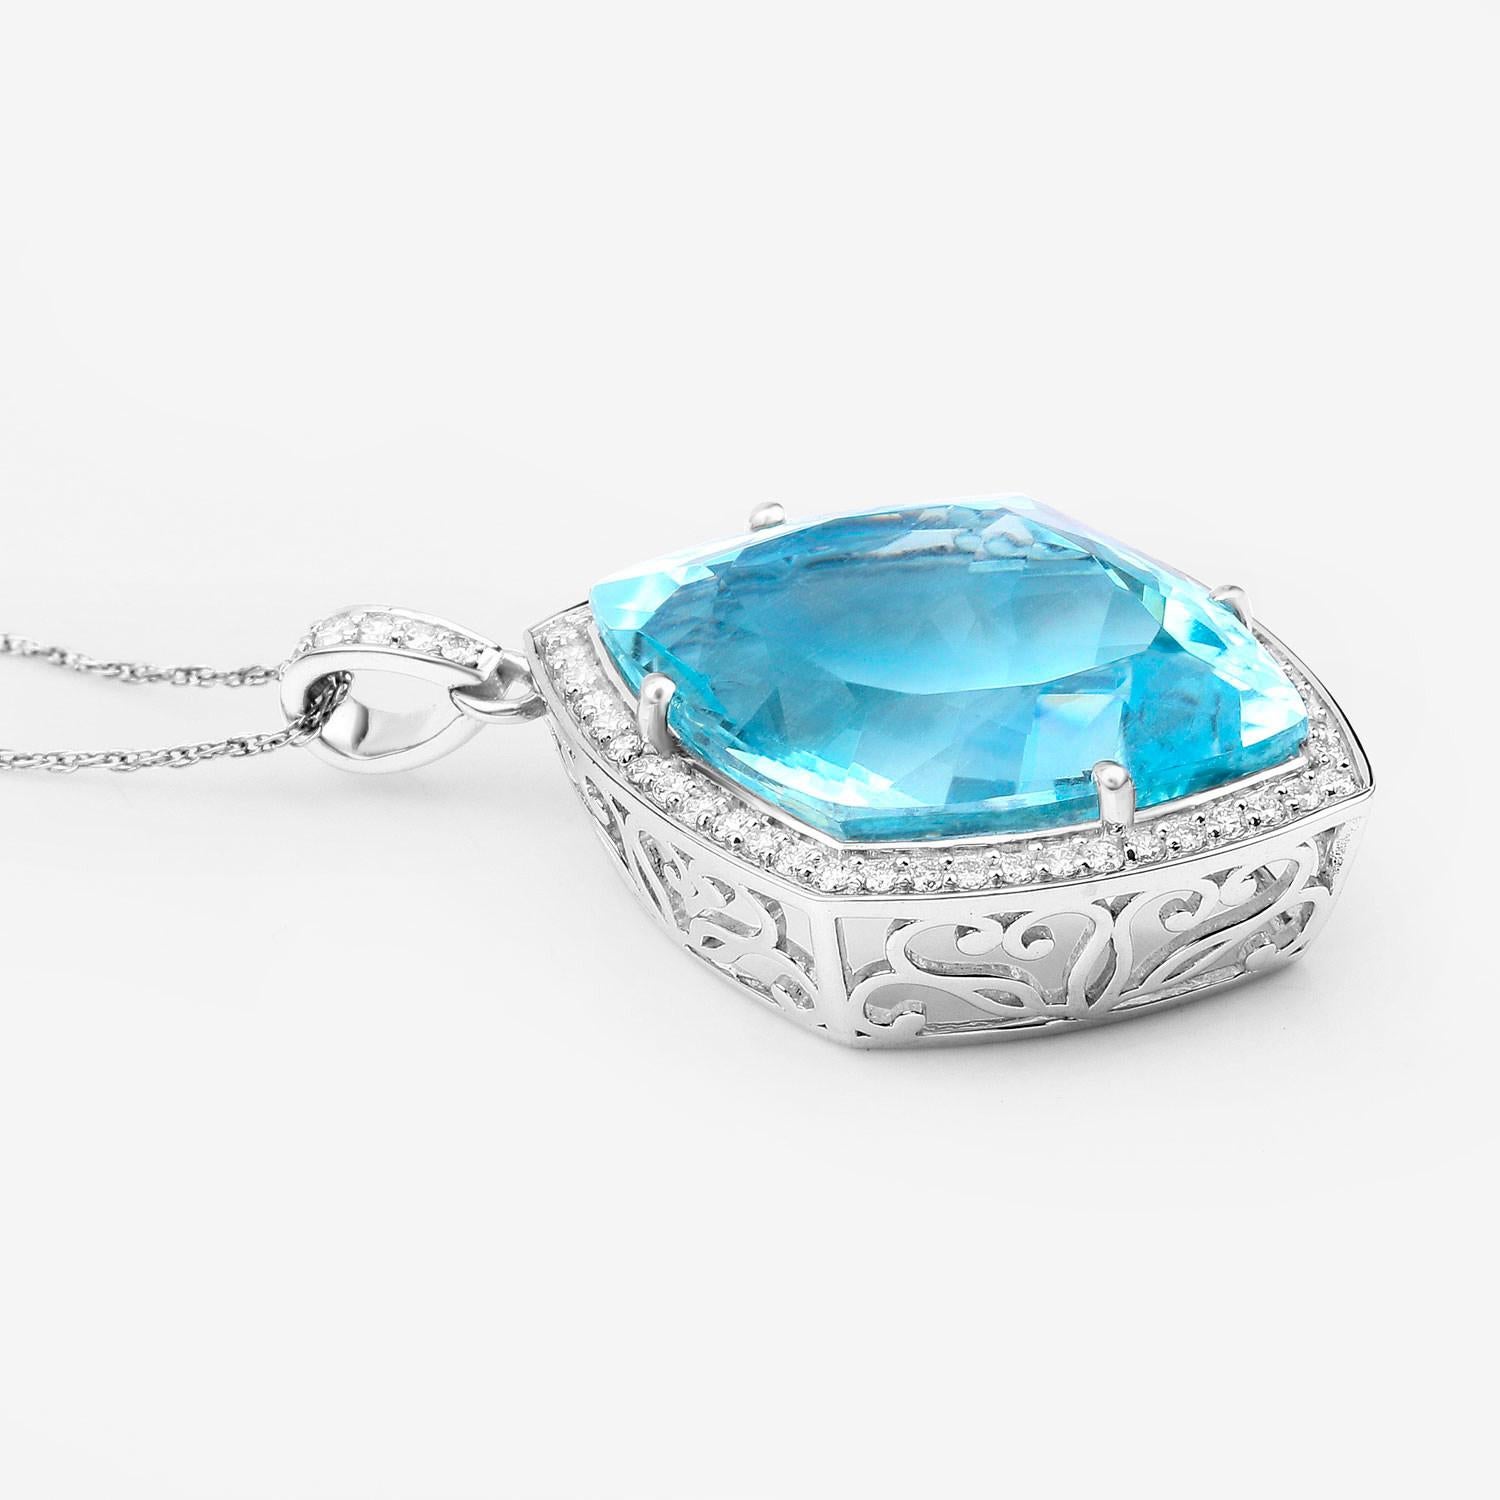 Marquise Cut Aquamarine Necklace With Diamond Halo 24.22 Carats 14K White Gold For Sale